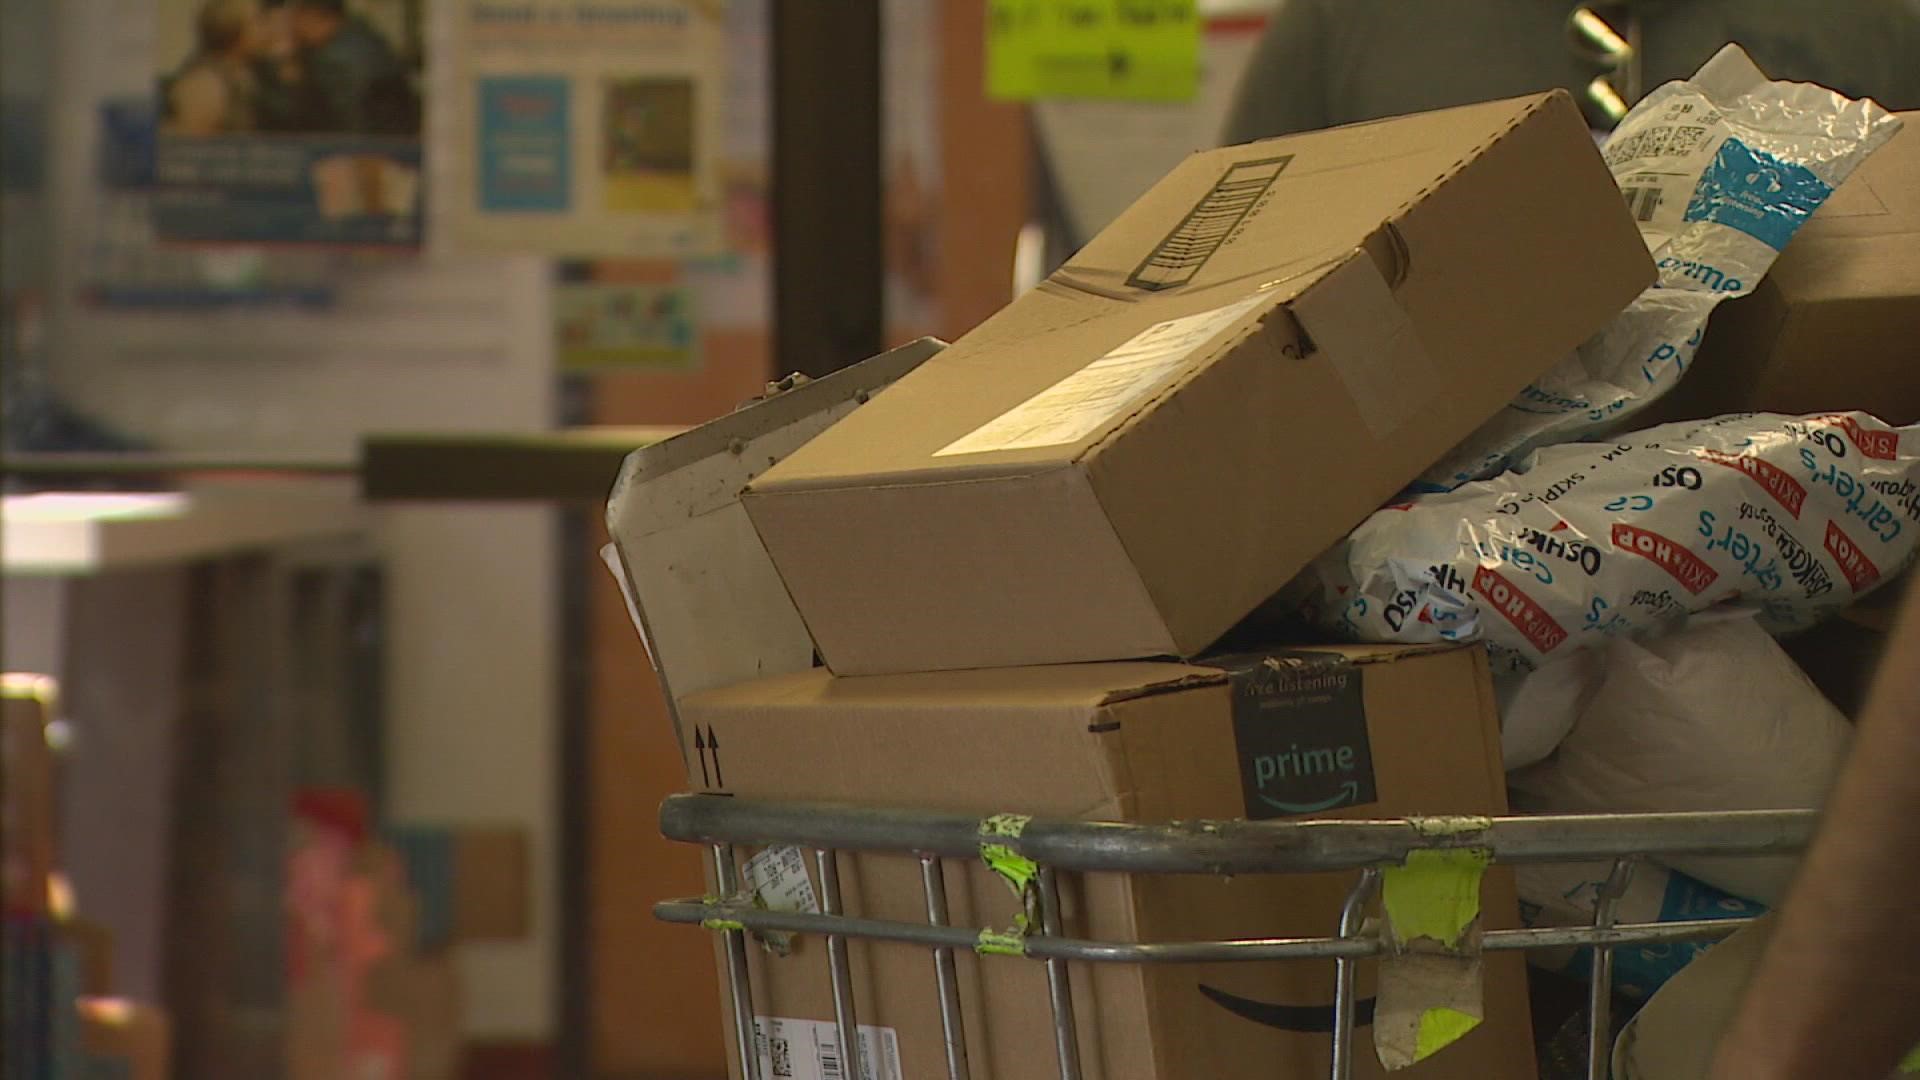 The service delays could mean no ballots for Tuesday's primary election.